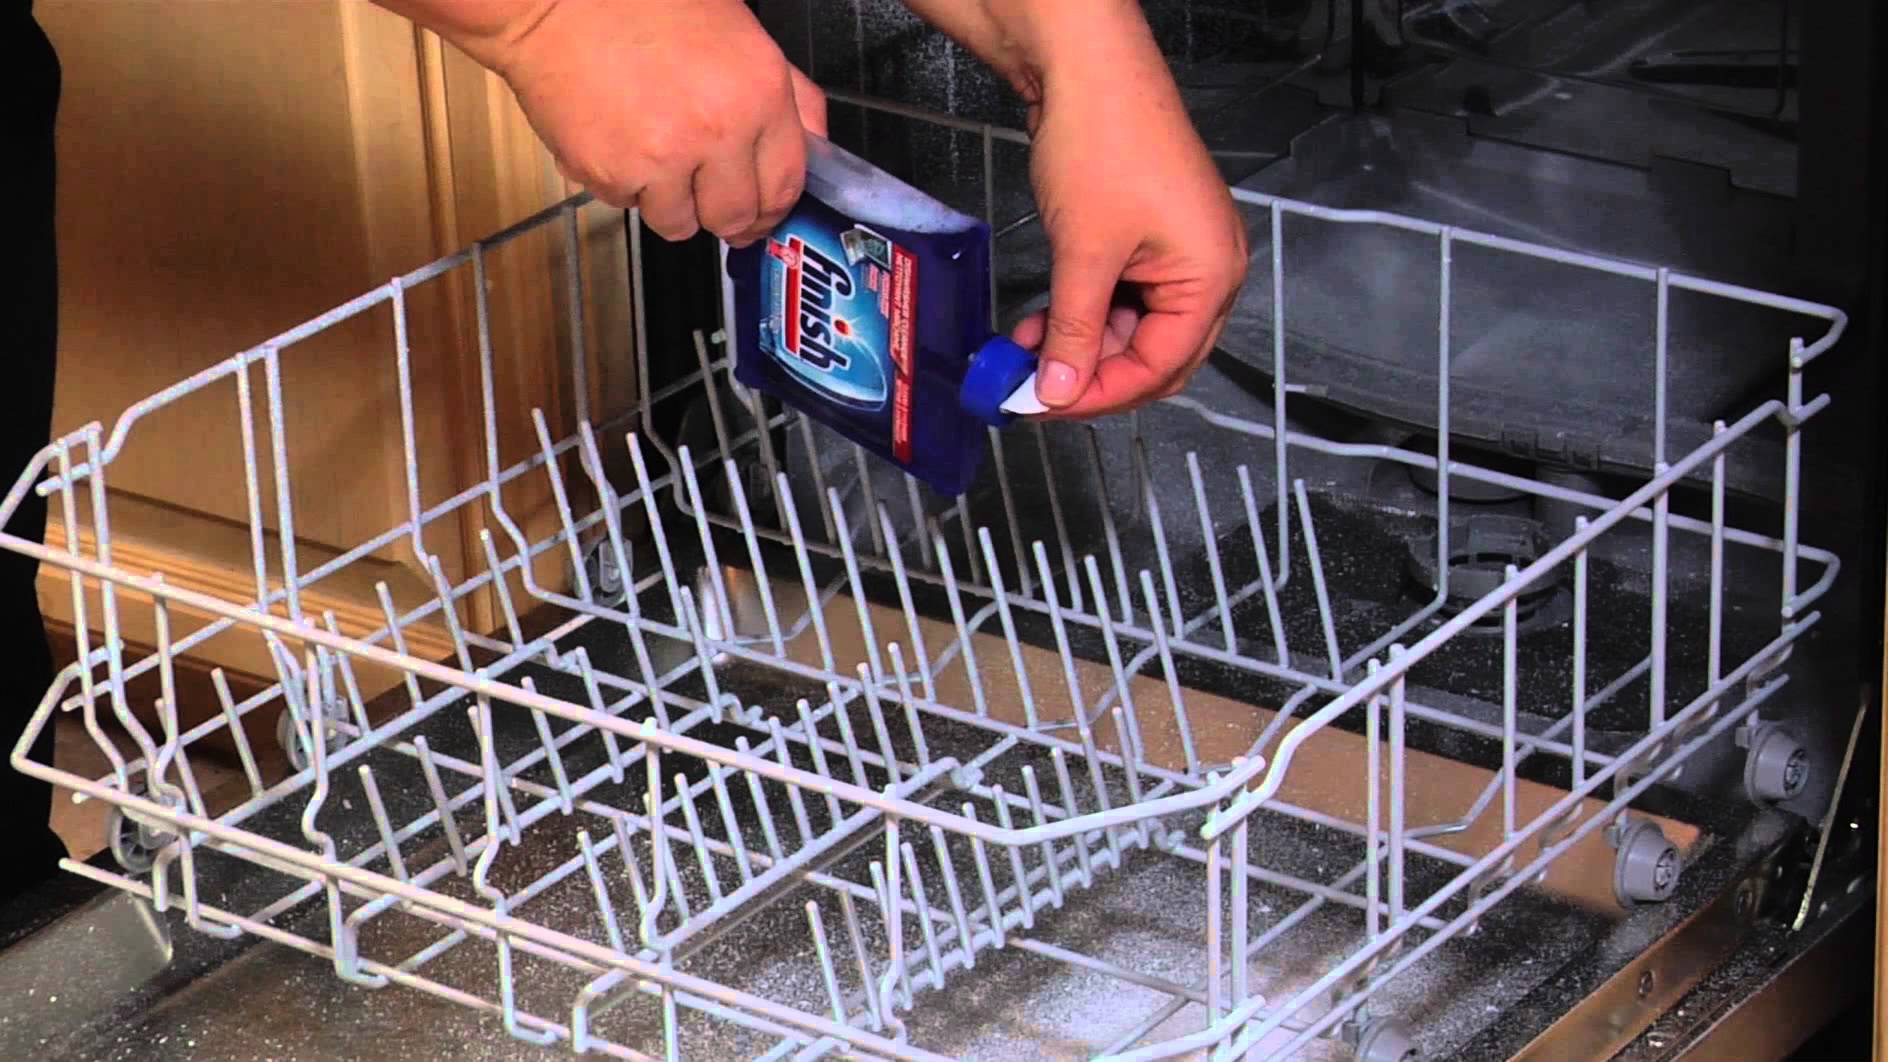 How To Clean Inside Of Dishwasher